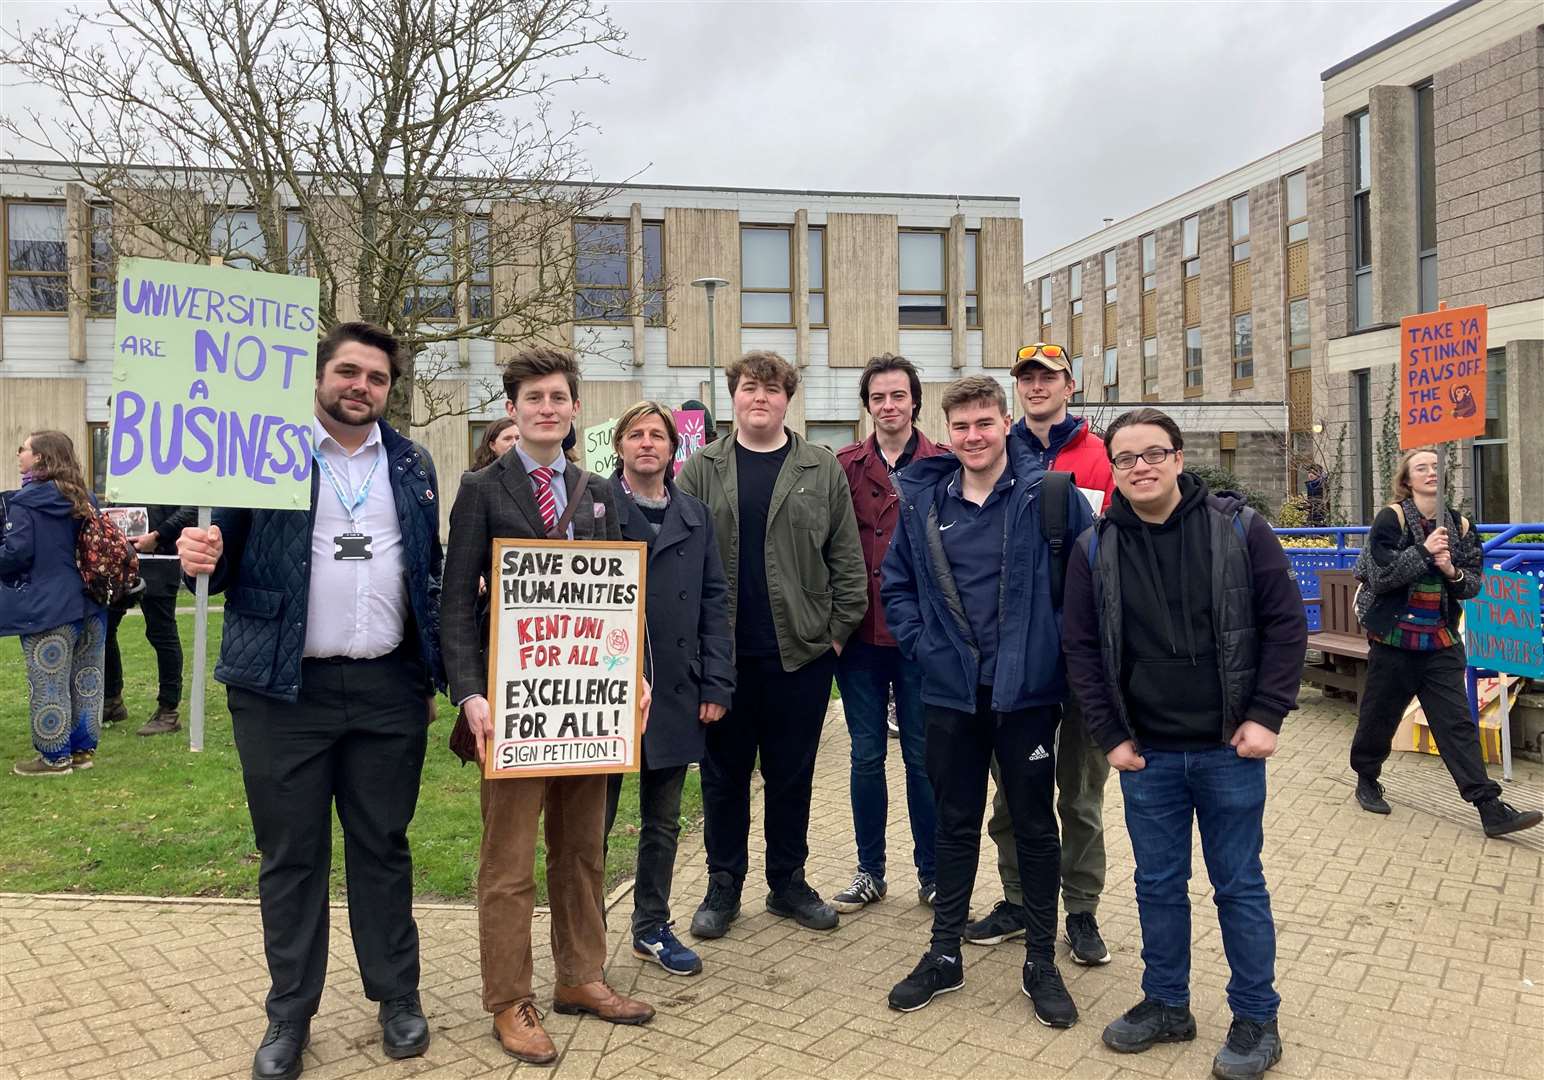 Labour councillors and members of the university's Labour Society at the University of Kent protests